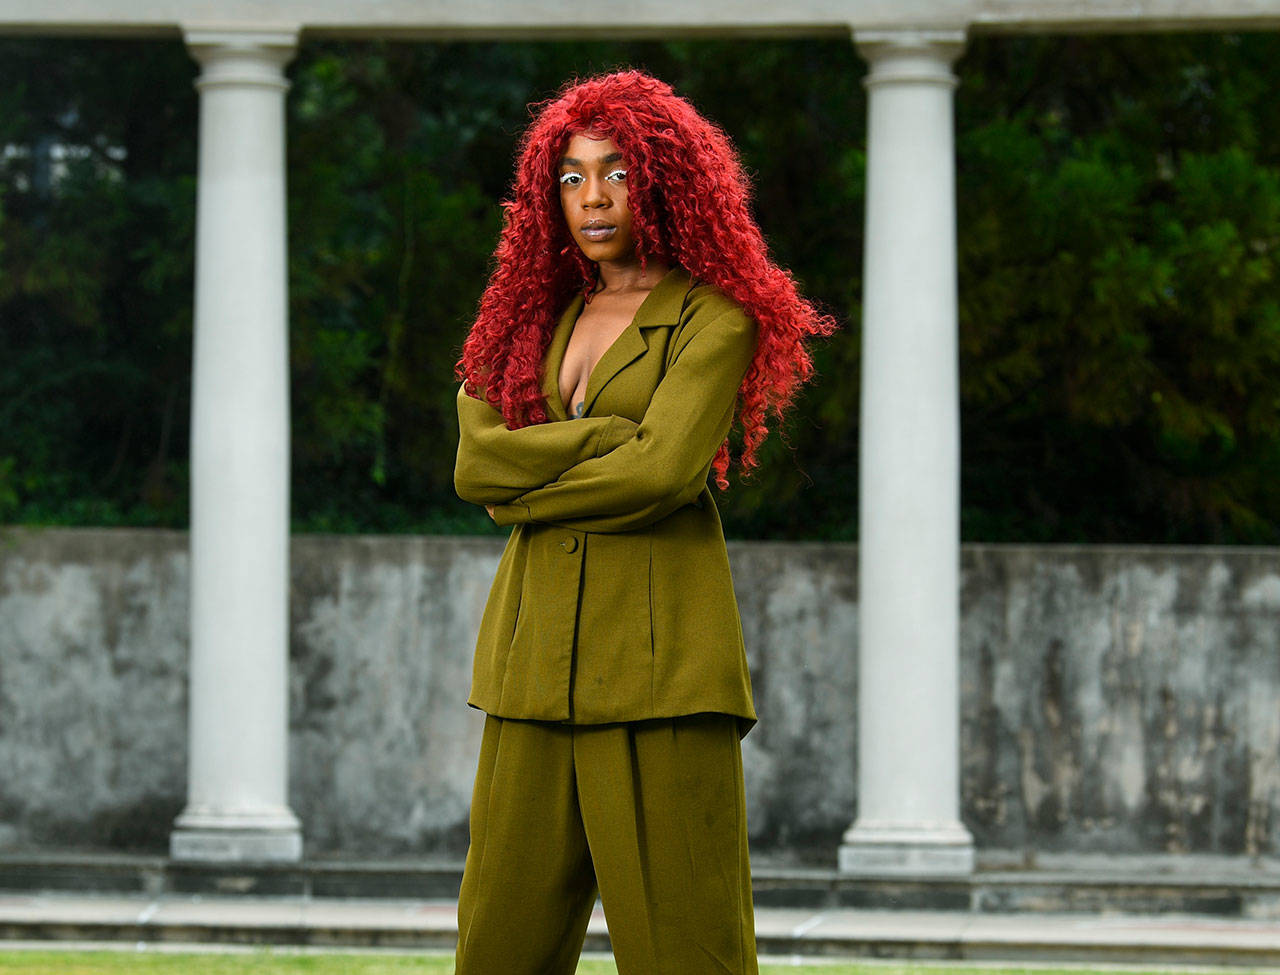 This Aug. 19, 2019 photo shows music artist Buku Abi, born Joann Kelly, posing in Atlanta. As the daughter of R. Kelly, she experienced her fair share of hardships. She is no longer in touch with him and says being R. Kelly’s daughter is like “a double-edged sword.” In March, Abi released her debut EP “Don’t Call Me” and she appeared on the WEtv reality series, “Growing Up Hip Hop: Atlanta.” (AP Photo/John Amis)